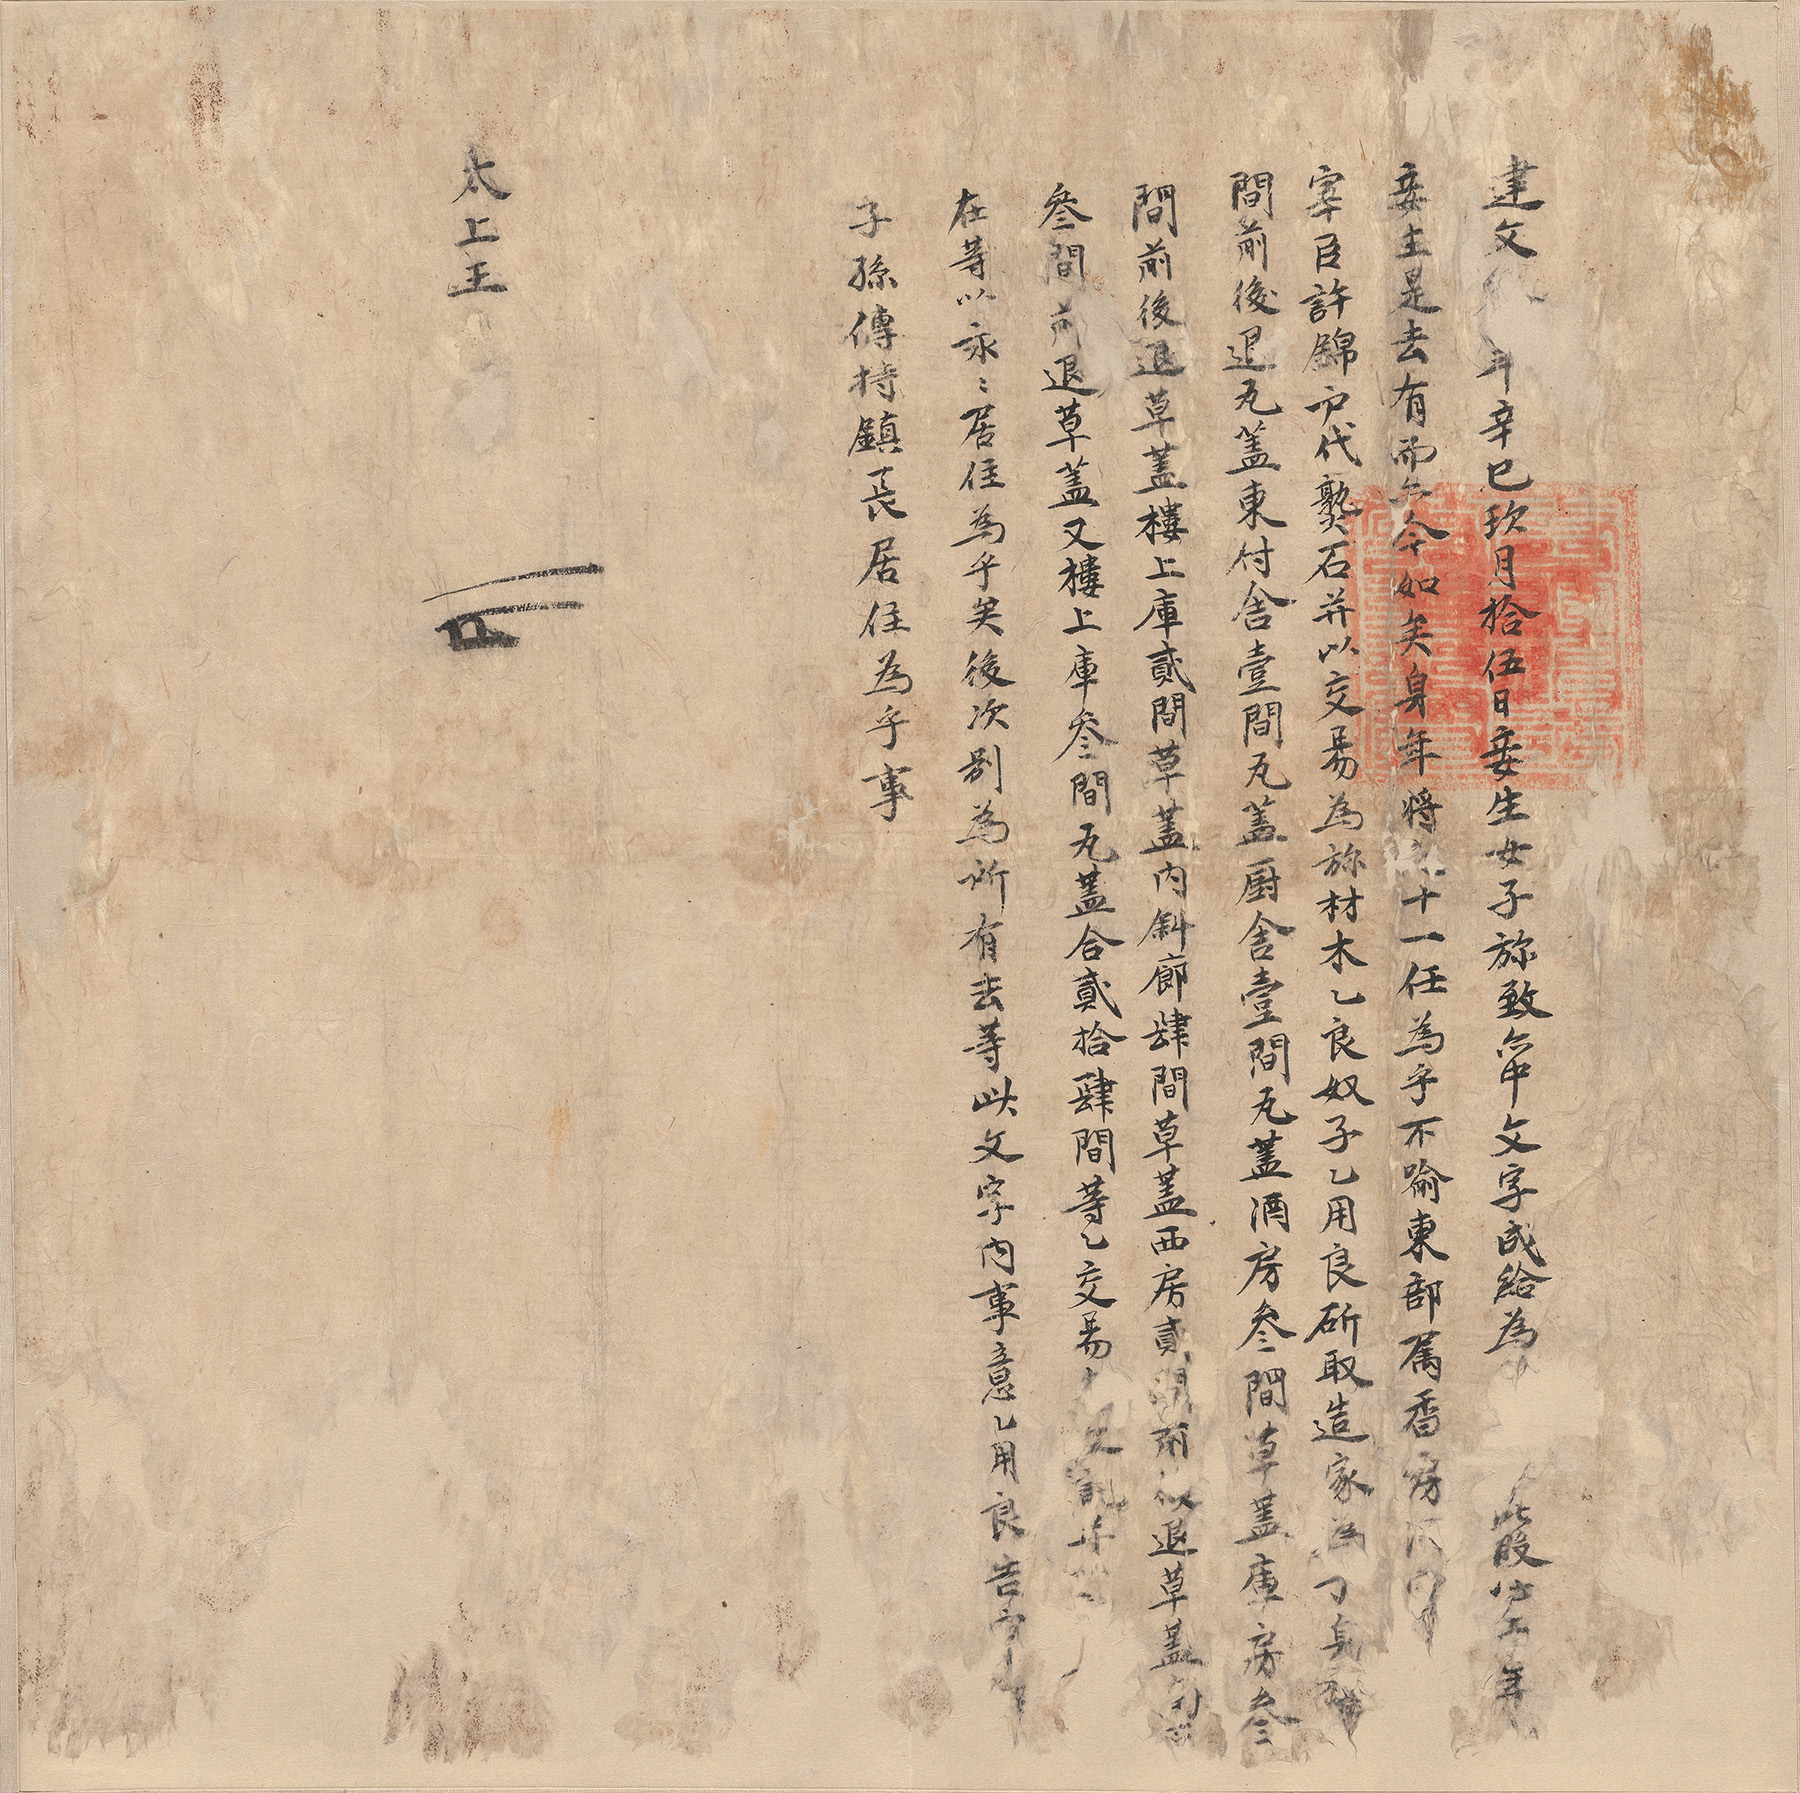 Document Related to the Property Inheritance from Yi Seong-gye (King Taejo of the Joseon Dynasty) to His Daughter Princess Suksin, Joseon Dynasty, Korea, ink on paper, 56.5 x 55.5 cm (The National Museum of Korea, Treasure 515)